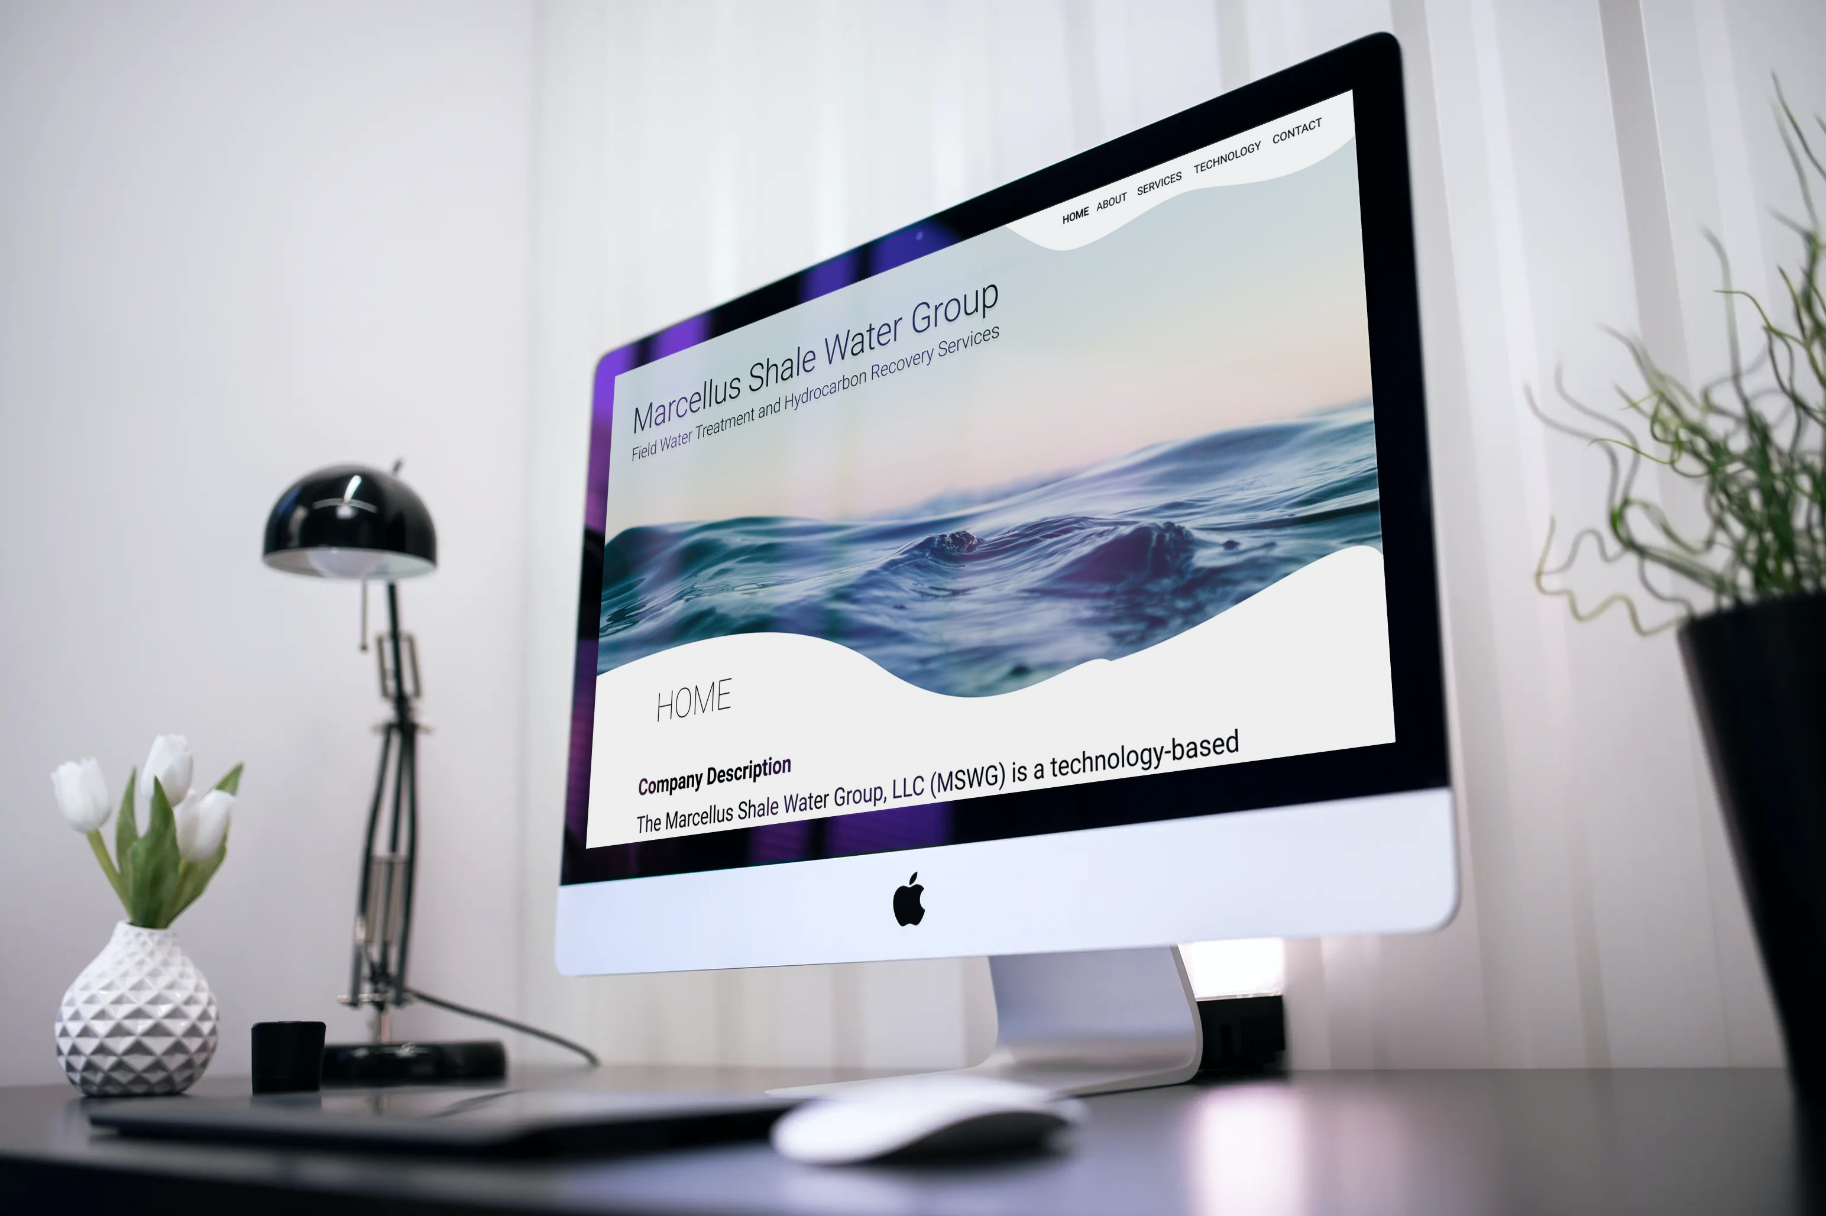 A computer displaying the splash screen of a modern looking website with photo header of water swirls